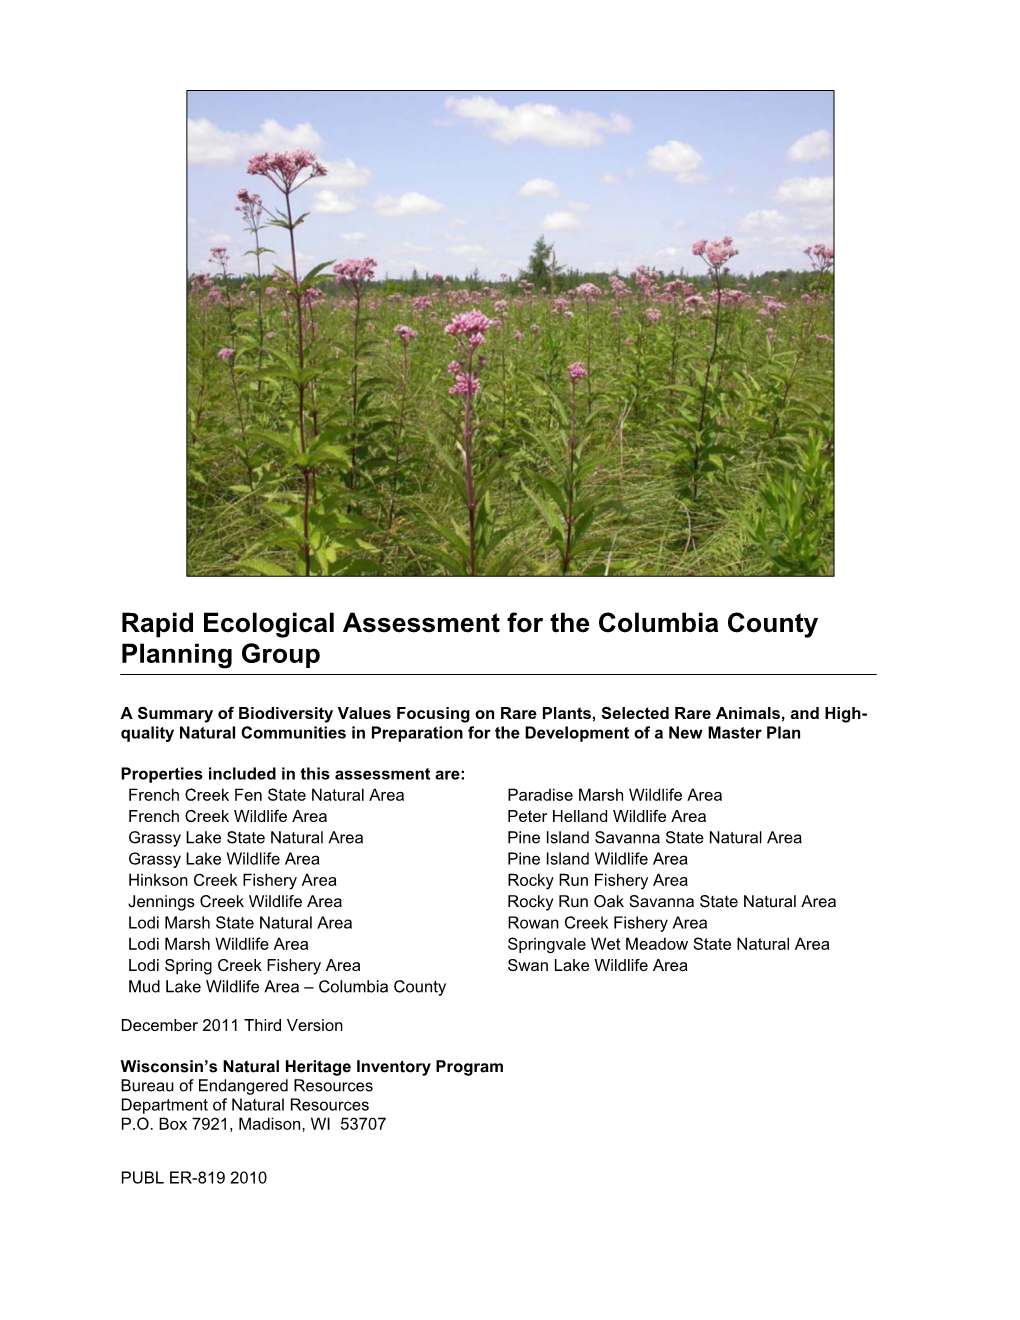 Rapid Ecological Assessment for the Columbia County Planning Group